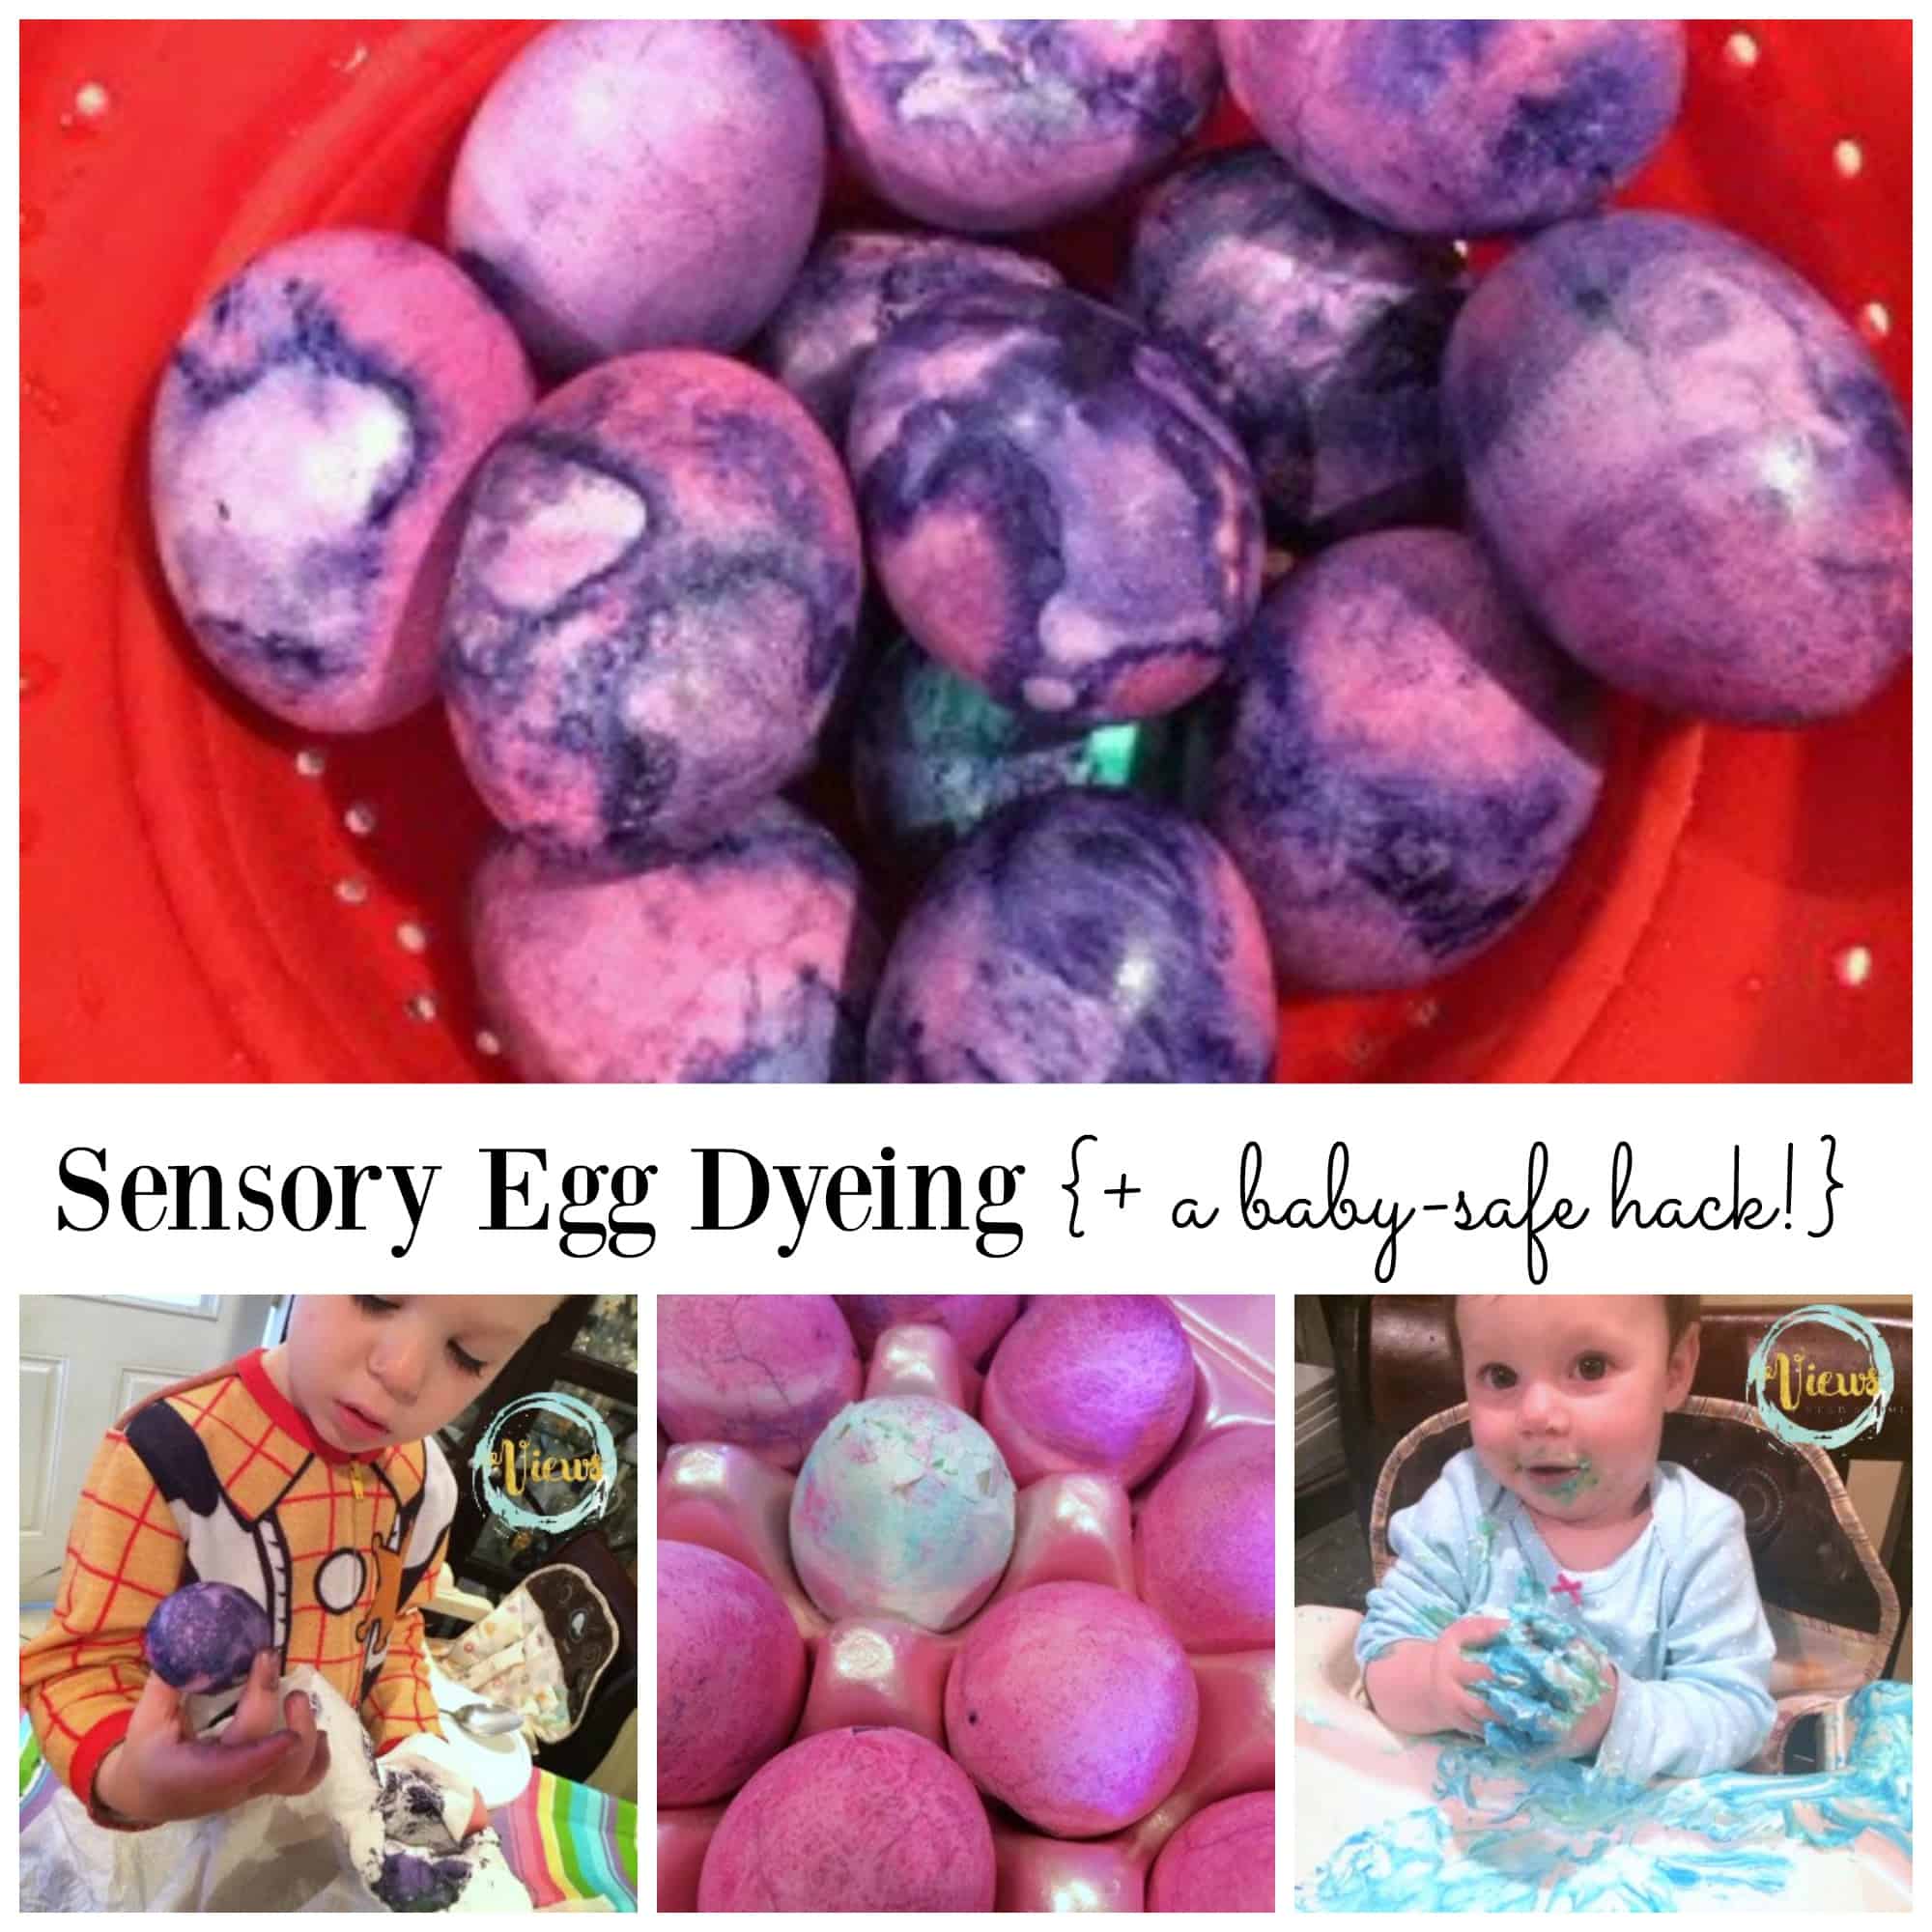 This sensory egg dyeing activity is such a great way for kids to get messy and celebrate Easter! Plus, a hack to make this process baby-safe! 